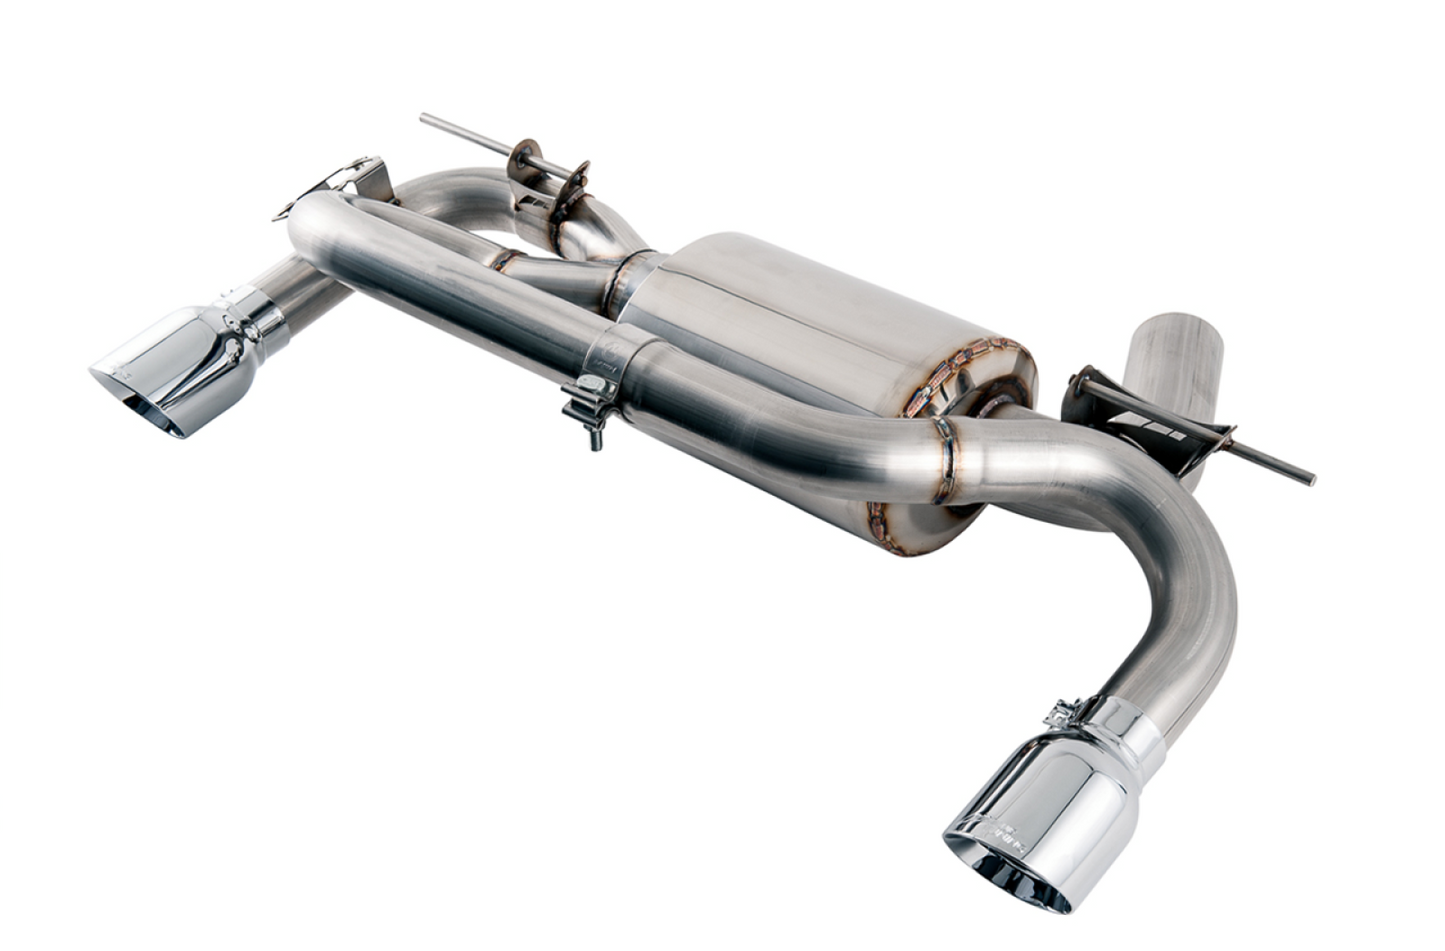 AWE Tuning Touring Edition Axle Back Exhaust for BMW F3X 340i / 440i - Chrome Silver Tips (90mm) 3010-32032